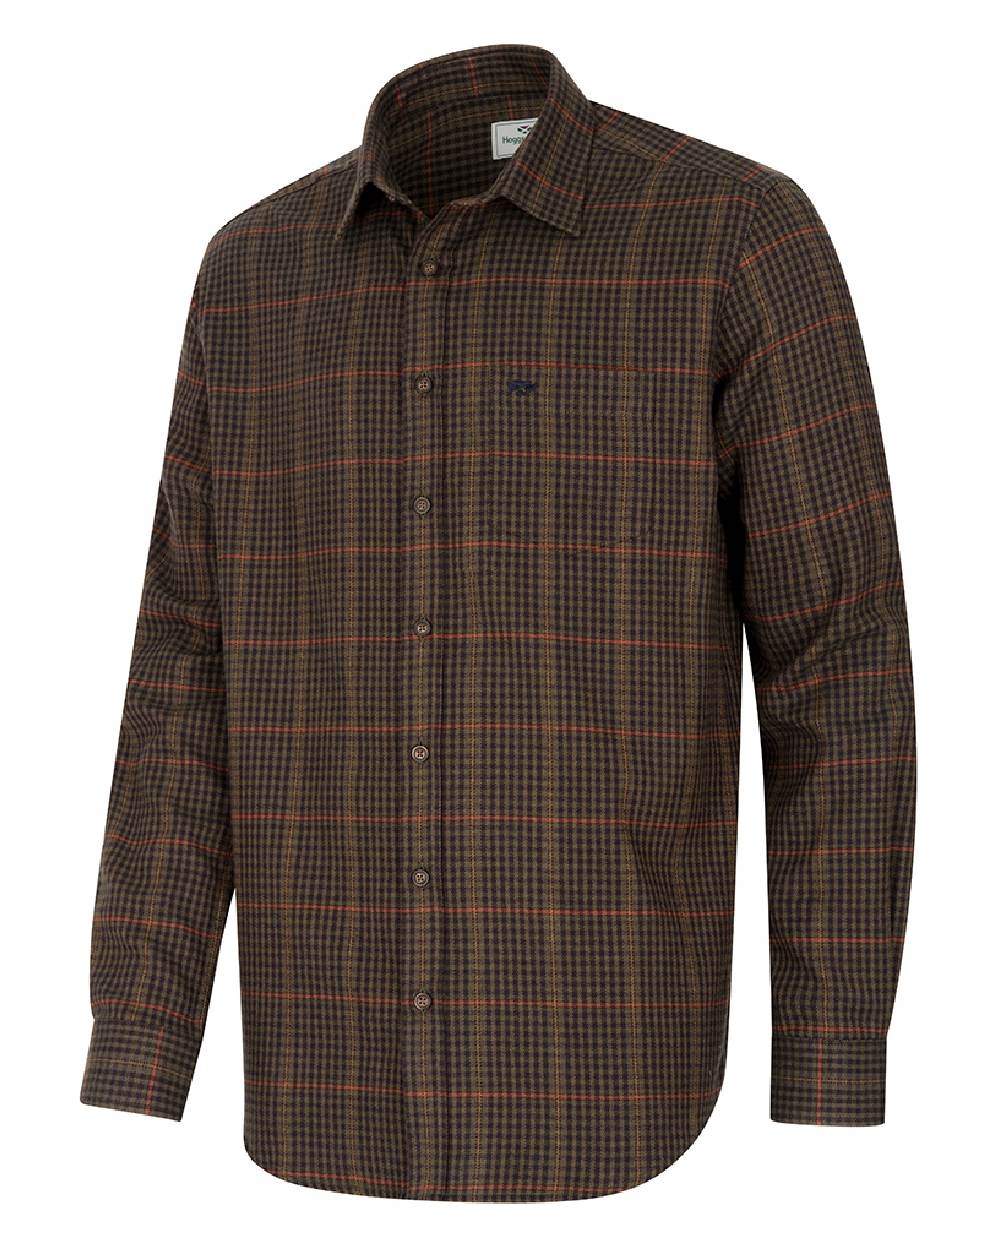 Hoggs of Fife Harris Cotton Wool Twill Check Shirt in Green 